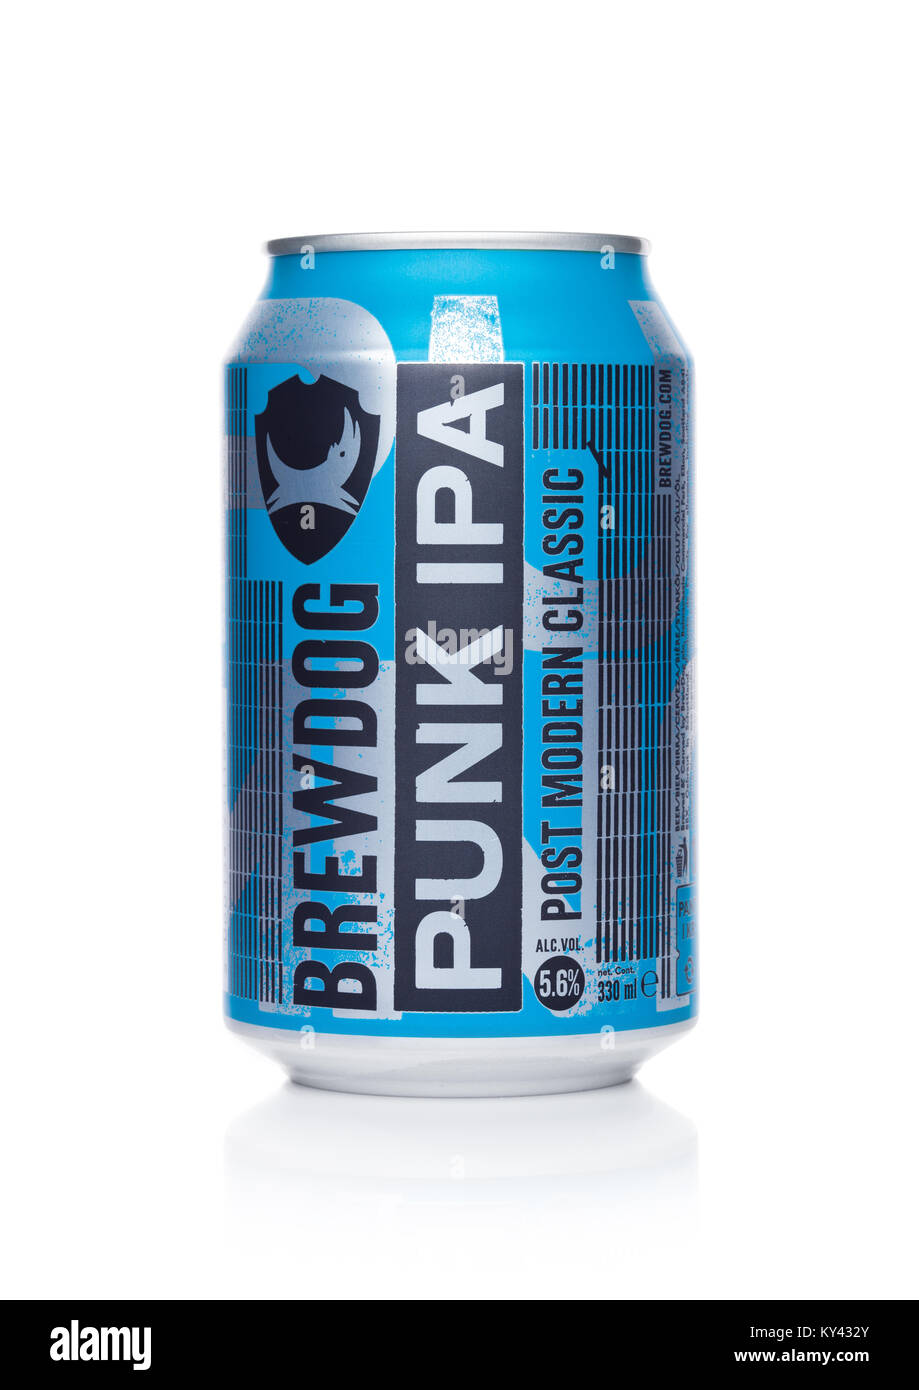 LONDON, UK - JANUARY 02, 2018: Aluminium can of Brewdog Punk Ipa beer post modern classic, from the Brewdog brewery on white background. Stock Photo